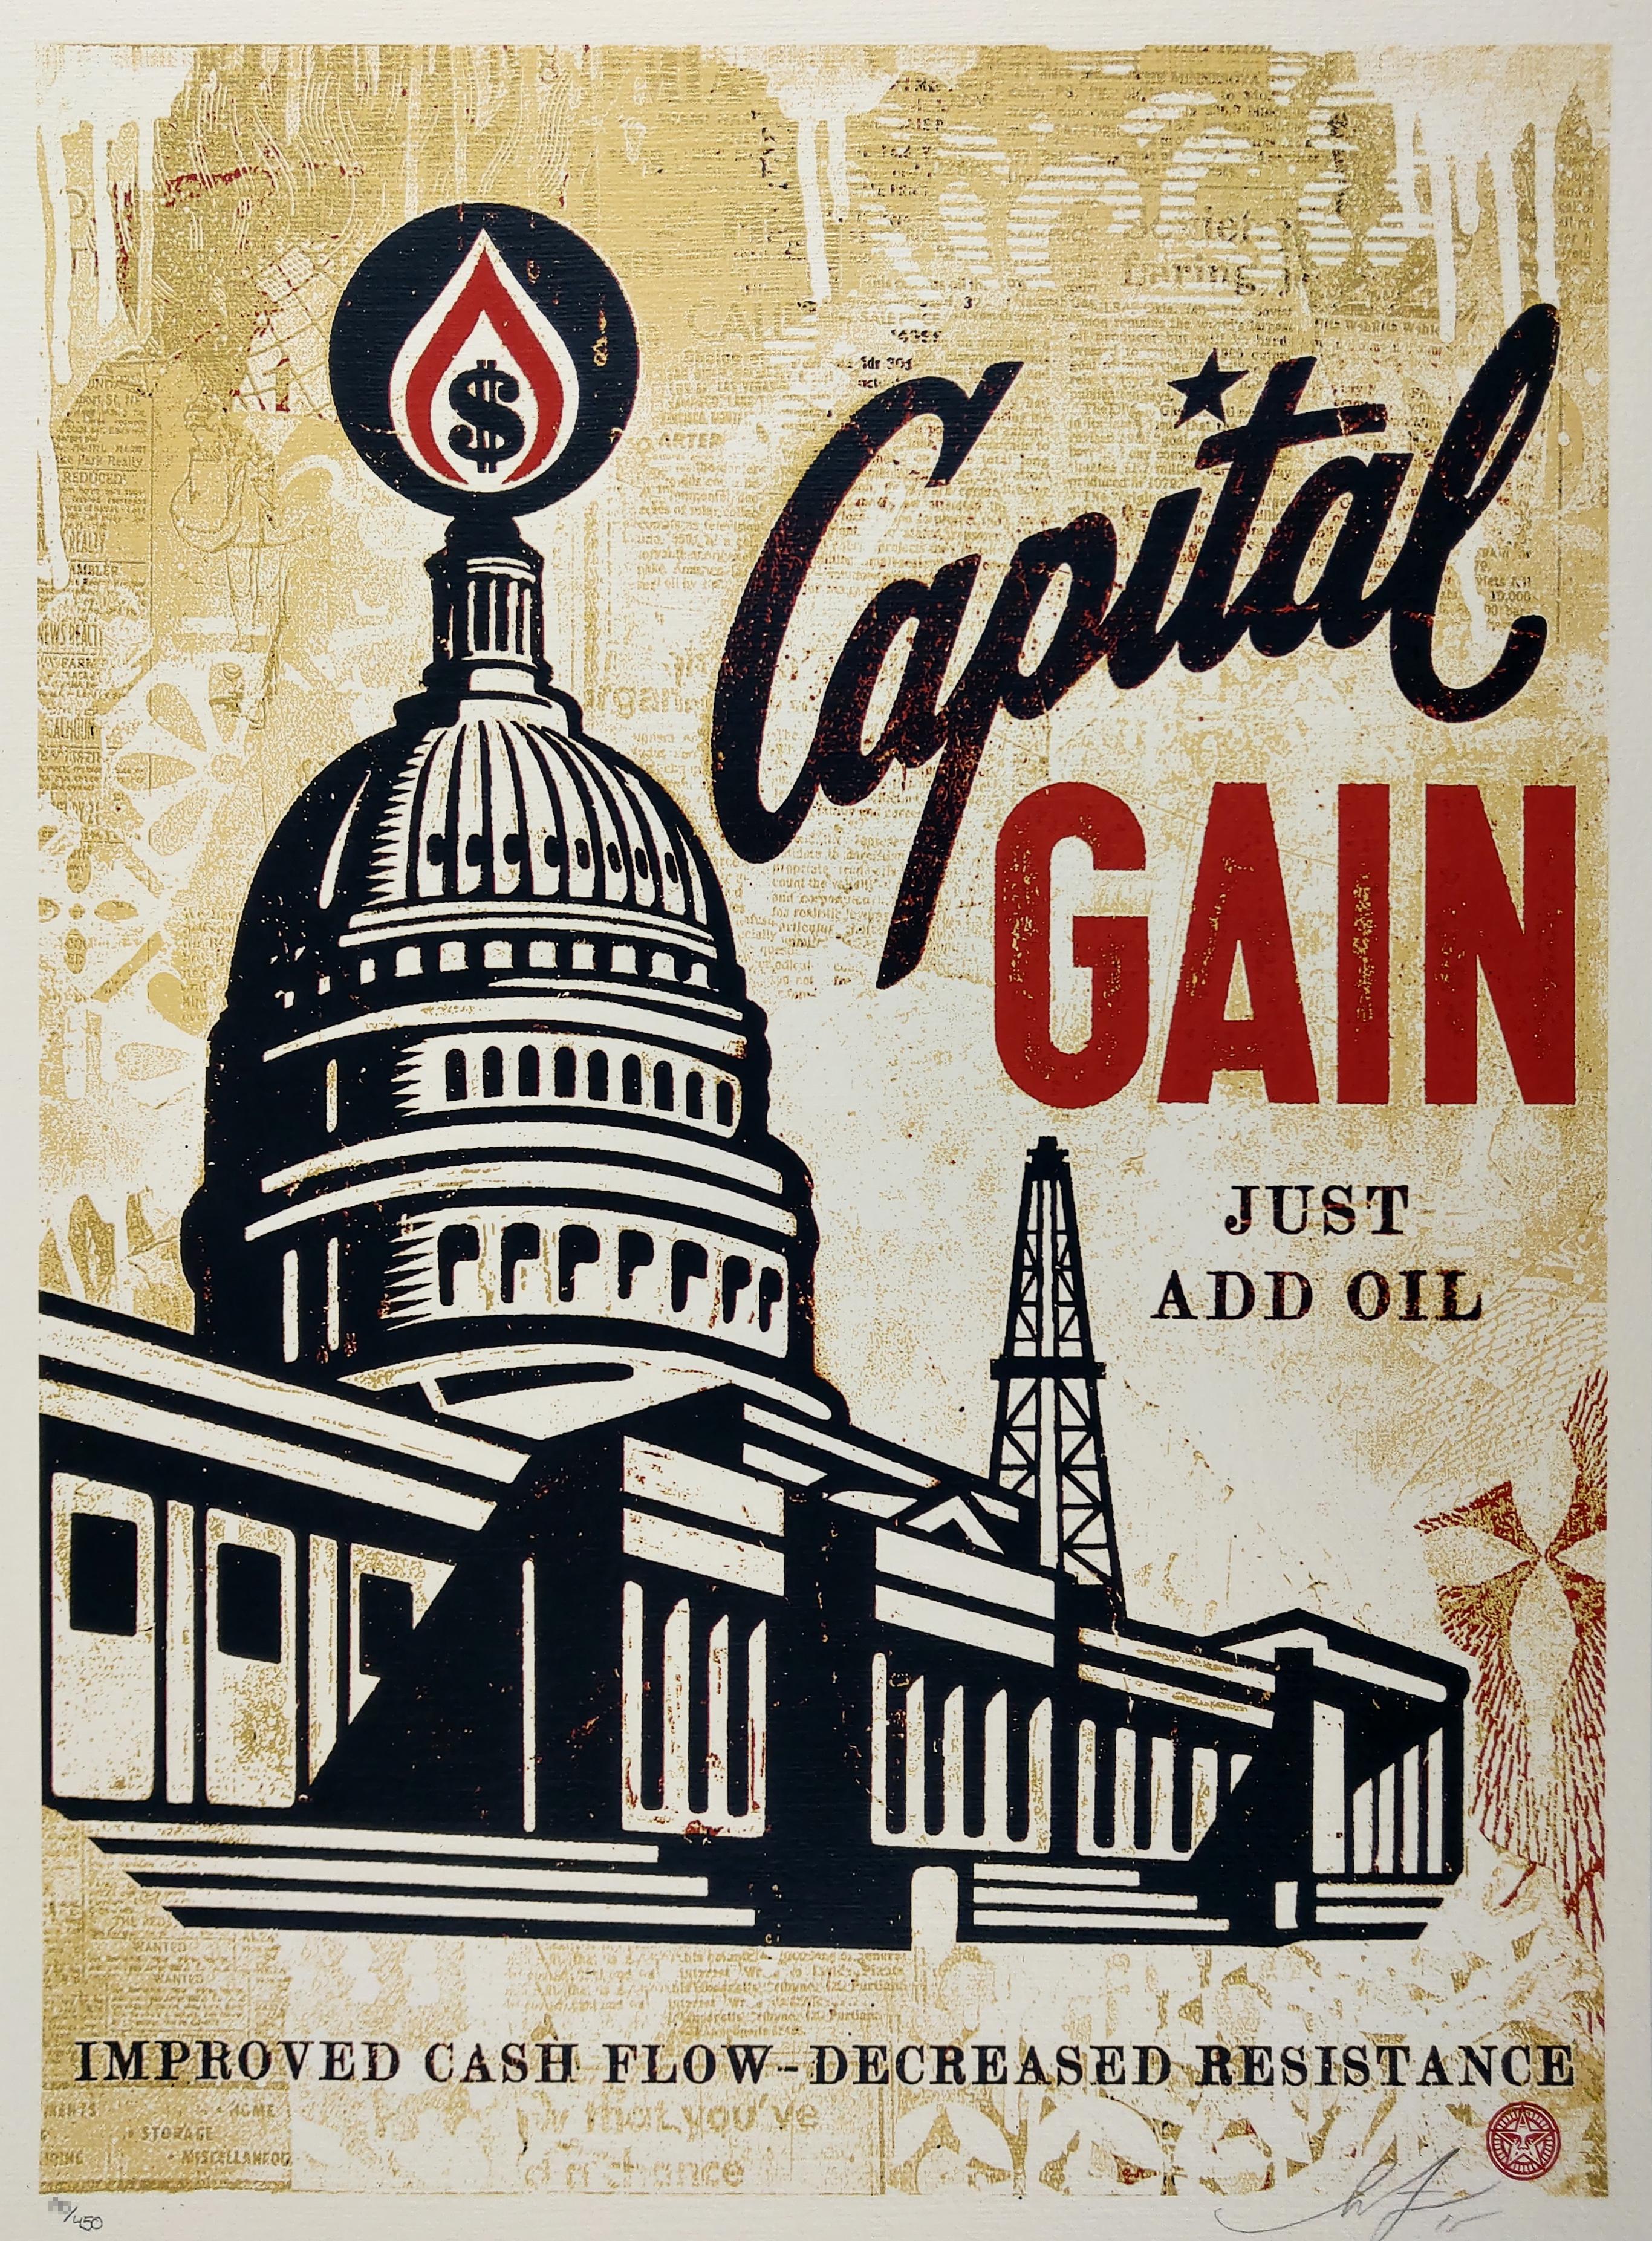 Capital Gain - Shepard Fairey Obey Contemporary Print. 18 x 24 inch screen print on French Paper 80# Cream Cordtone.  Signed and numbered edition of 450. 

The U.S. government gives approximately $70 billion in tax breaks and subsidies to the highly